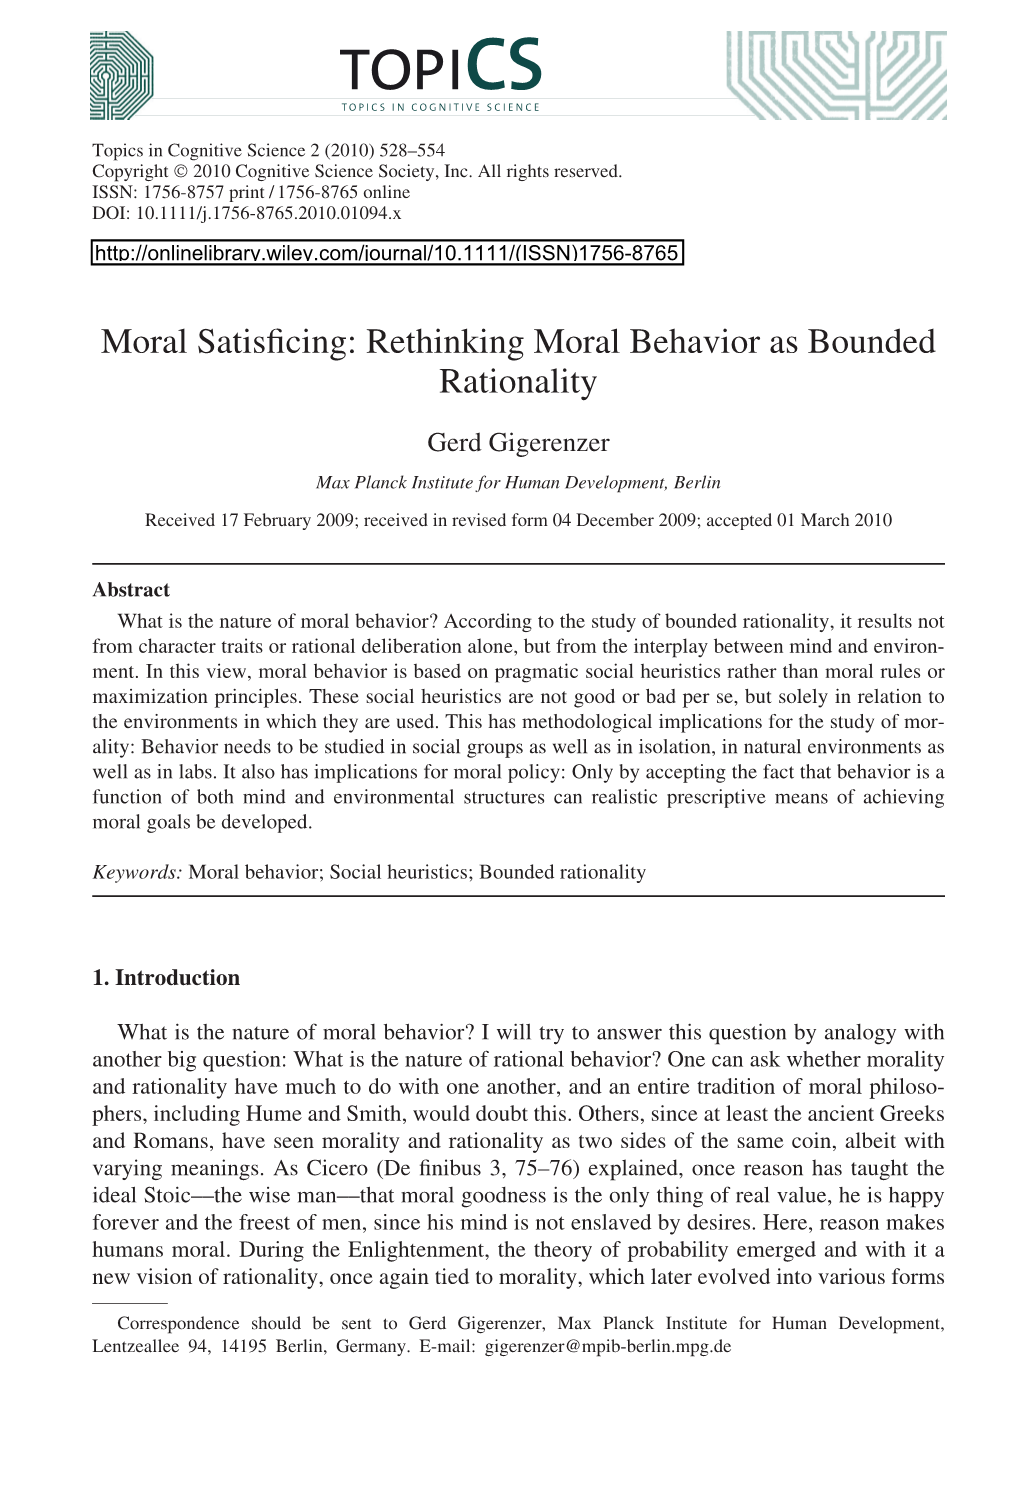 Rethinking Moral Behavior As Bounded Rationality